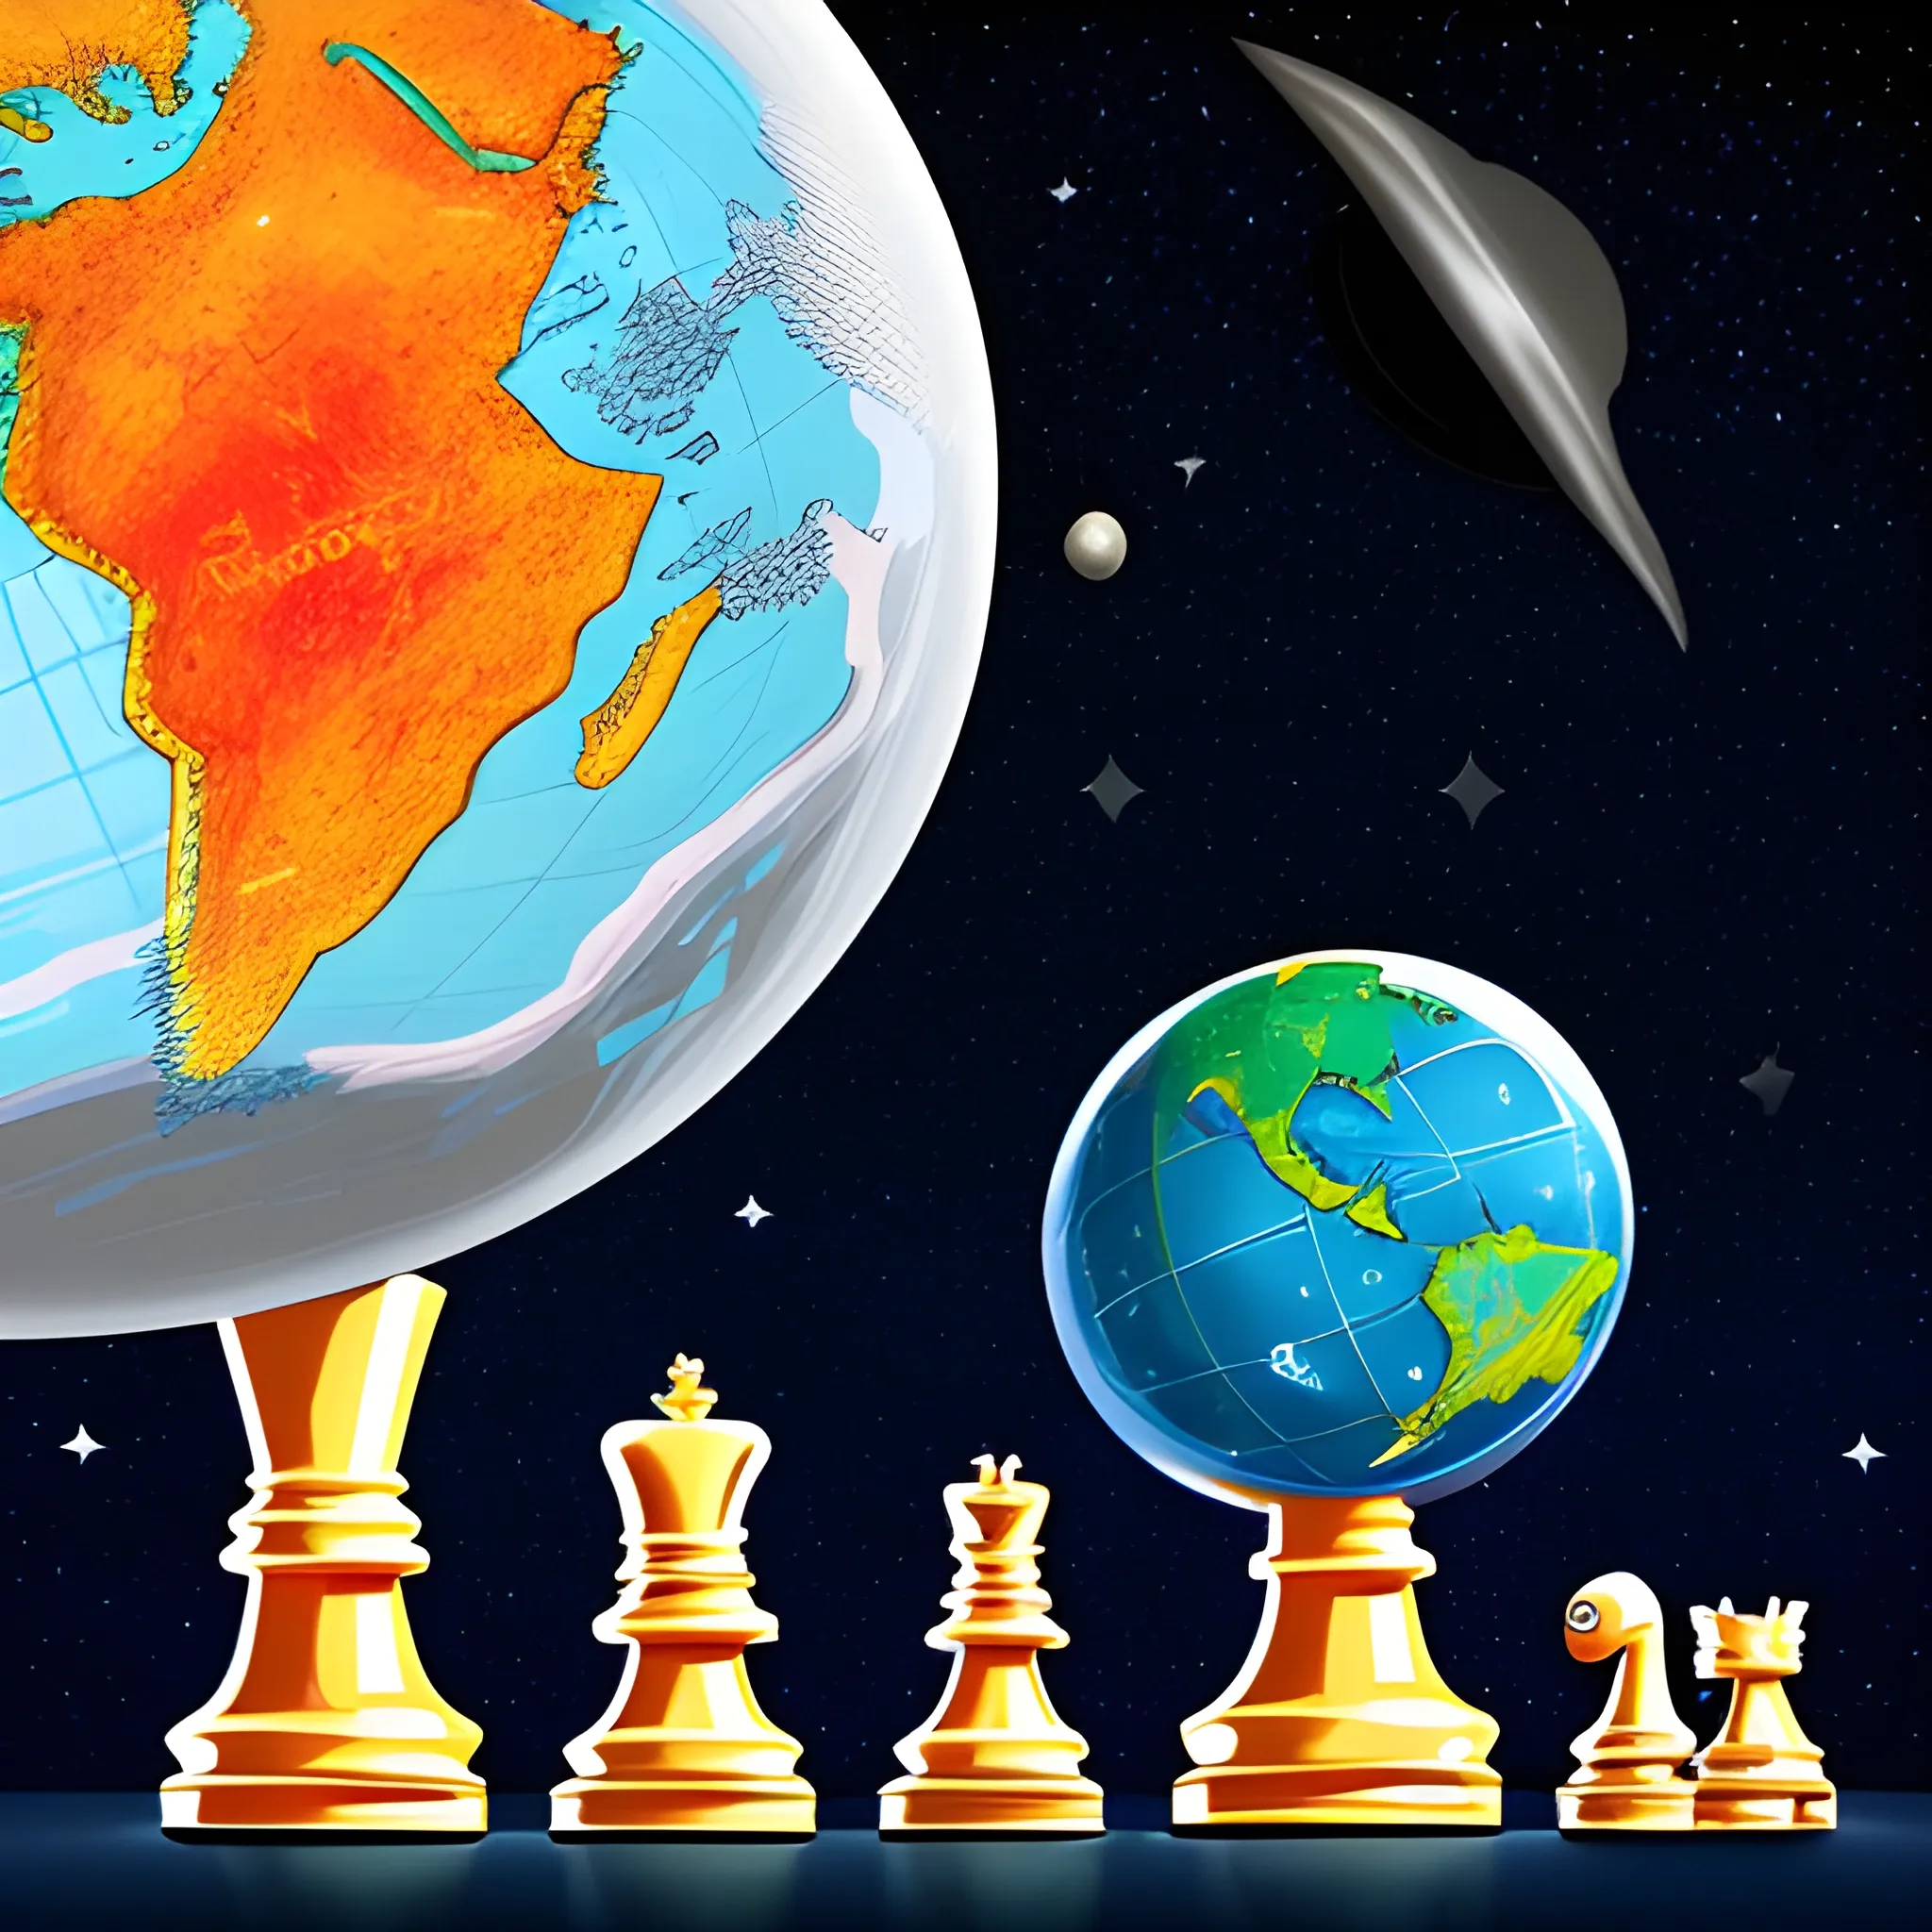 chess pieces around earth globe asteroida in background astronomical vivid colors, illustration style, cartoon style